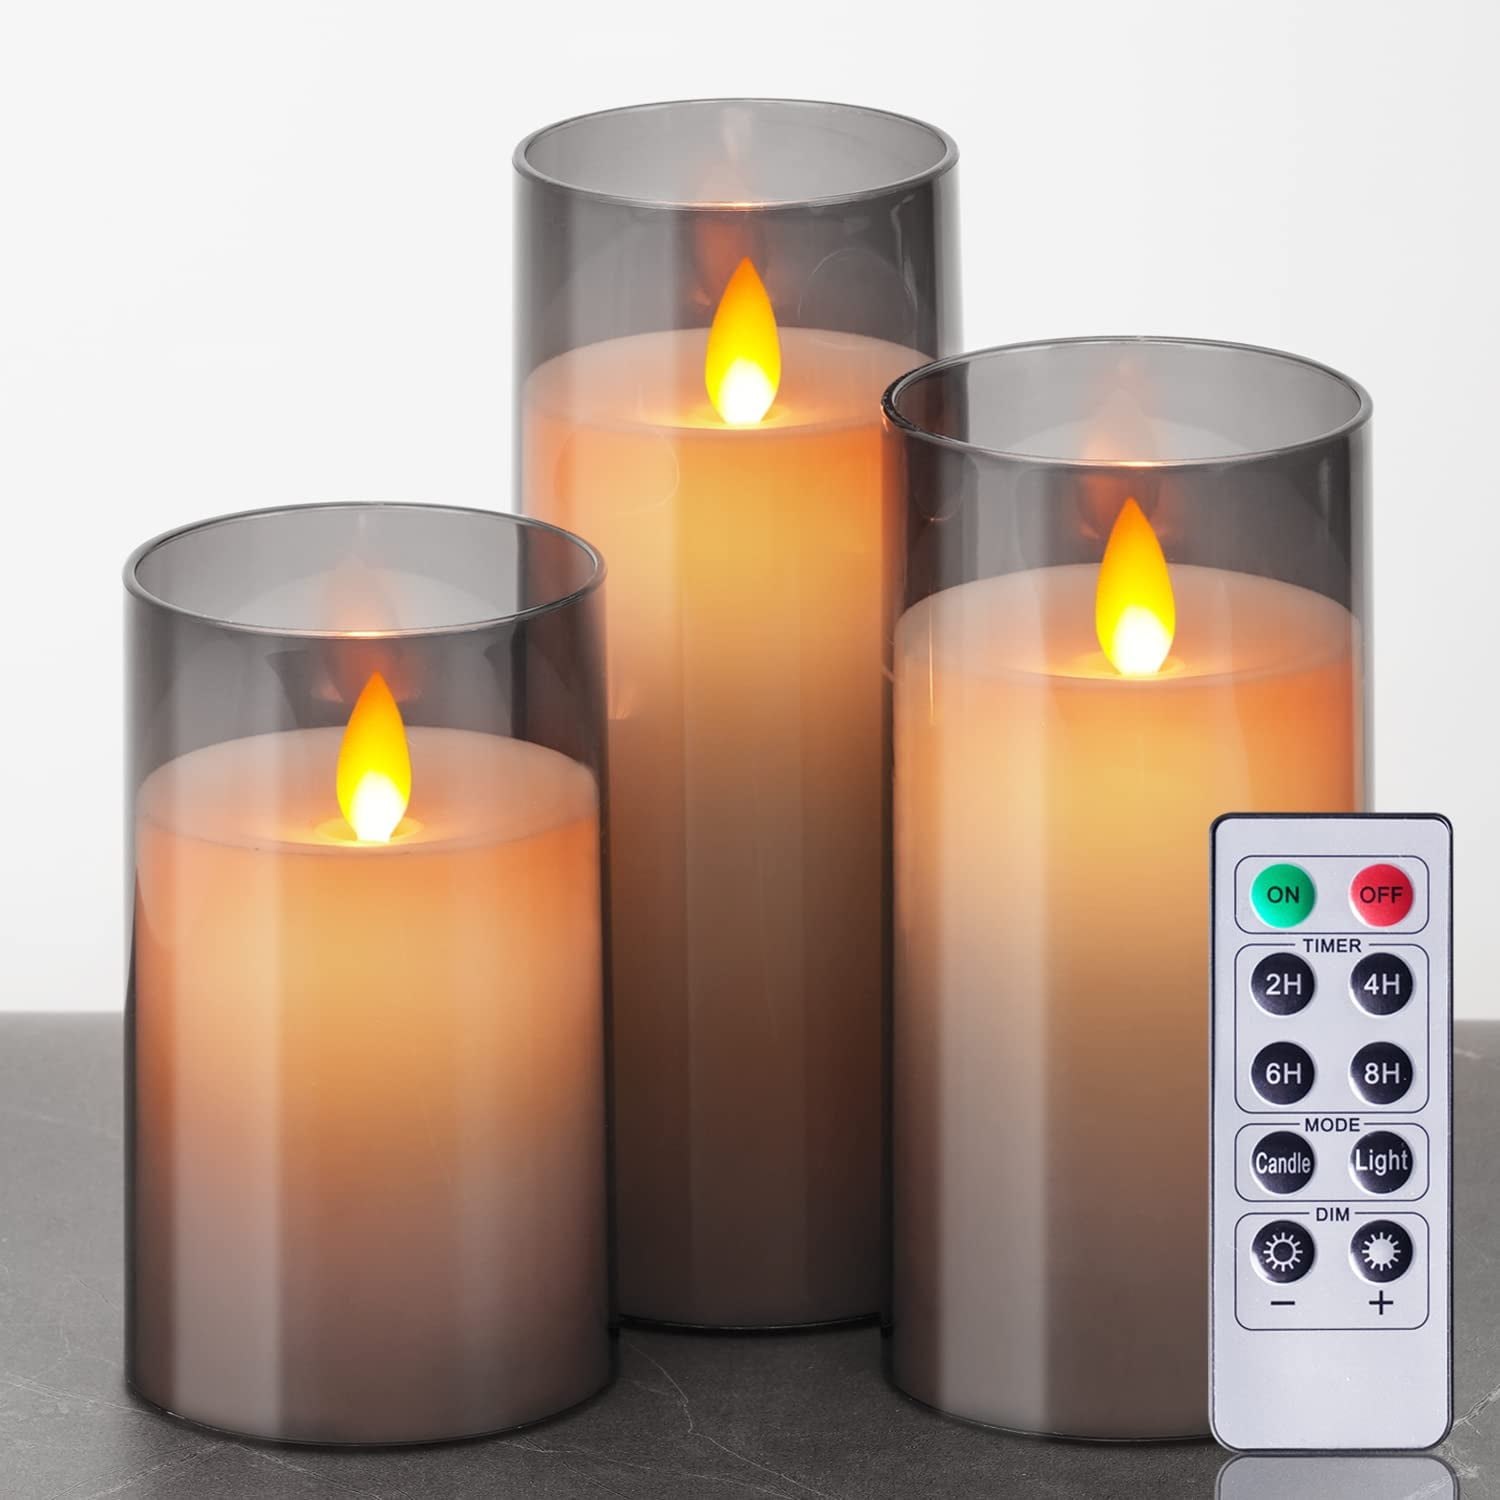 Grey Acrylic Flameless Candles Operated, Fake LED Pillar Candles with Remote Control and Timers, Moving Set of 3 - Walmart.com